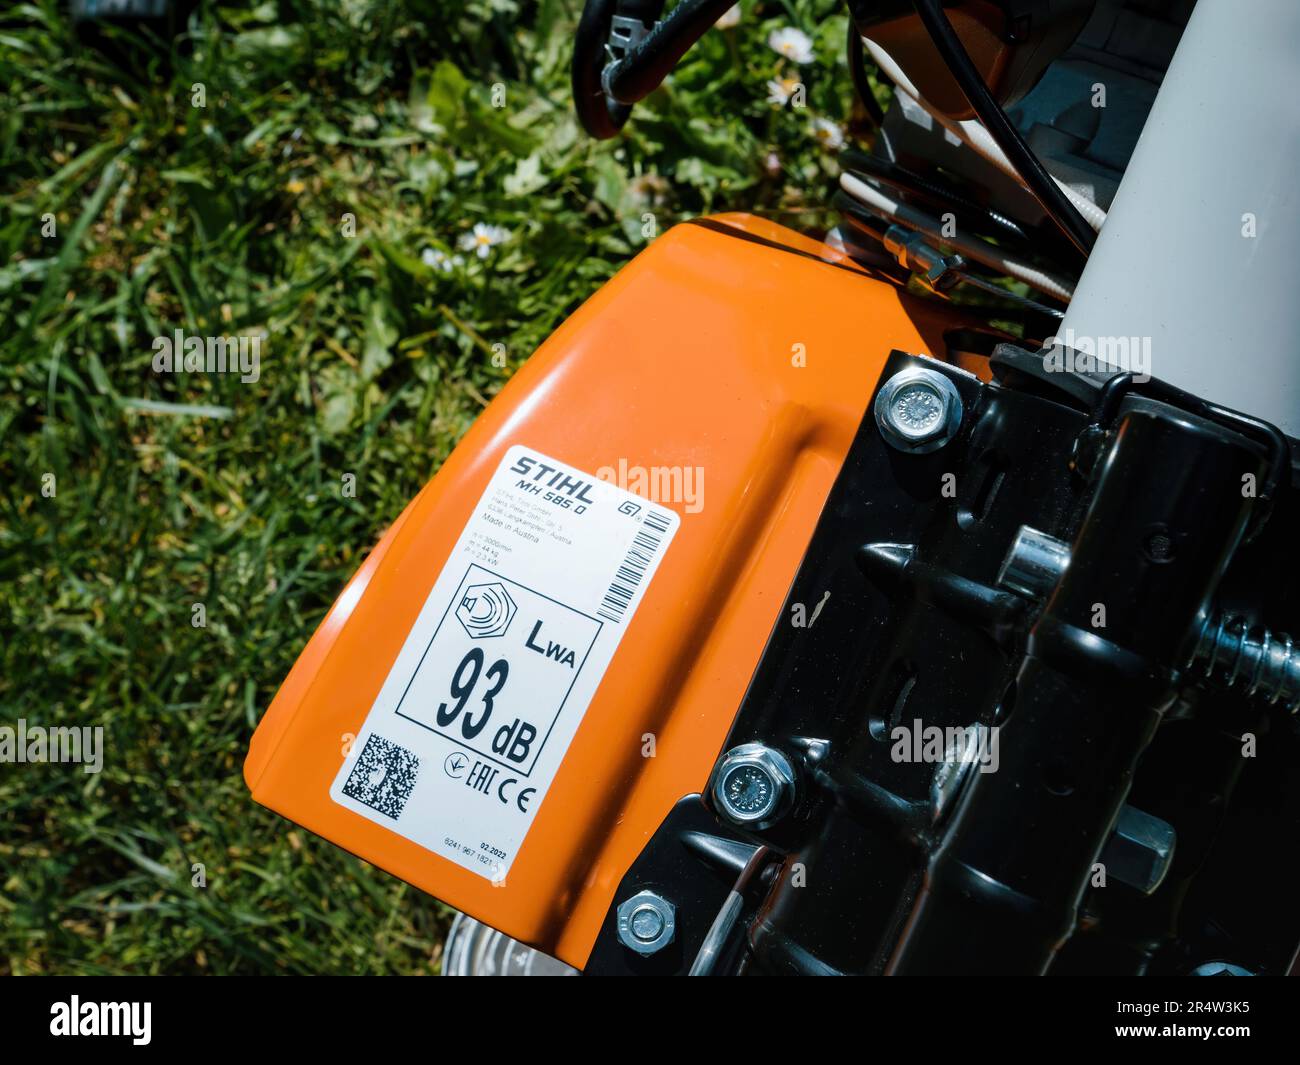 Frankfurt, Germany - May 3, 2023: Inscription plate on a sturdy, powerful machine built for tilling medium to large-sized plots of land--the Stihl MH Stock Photo